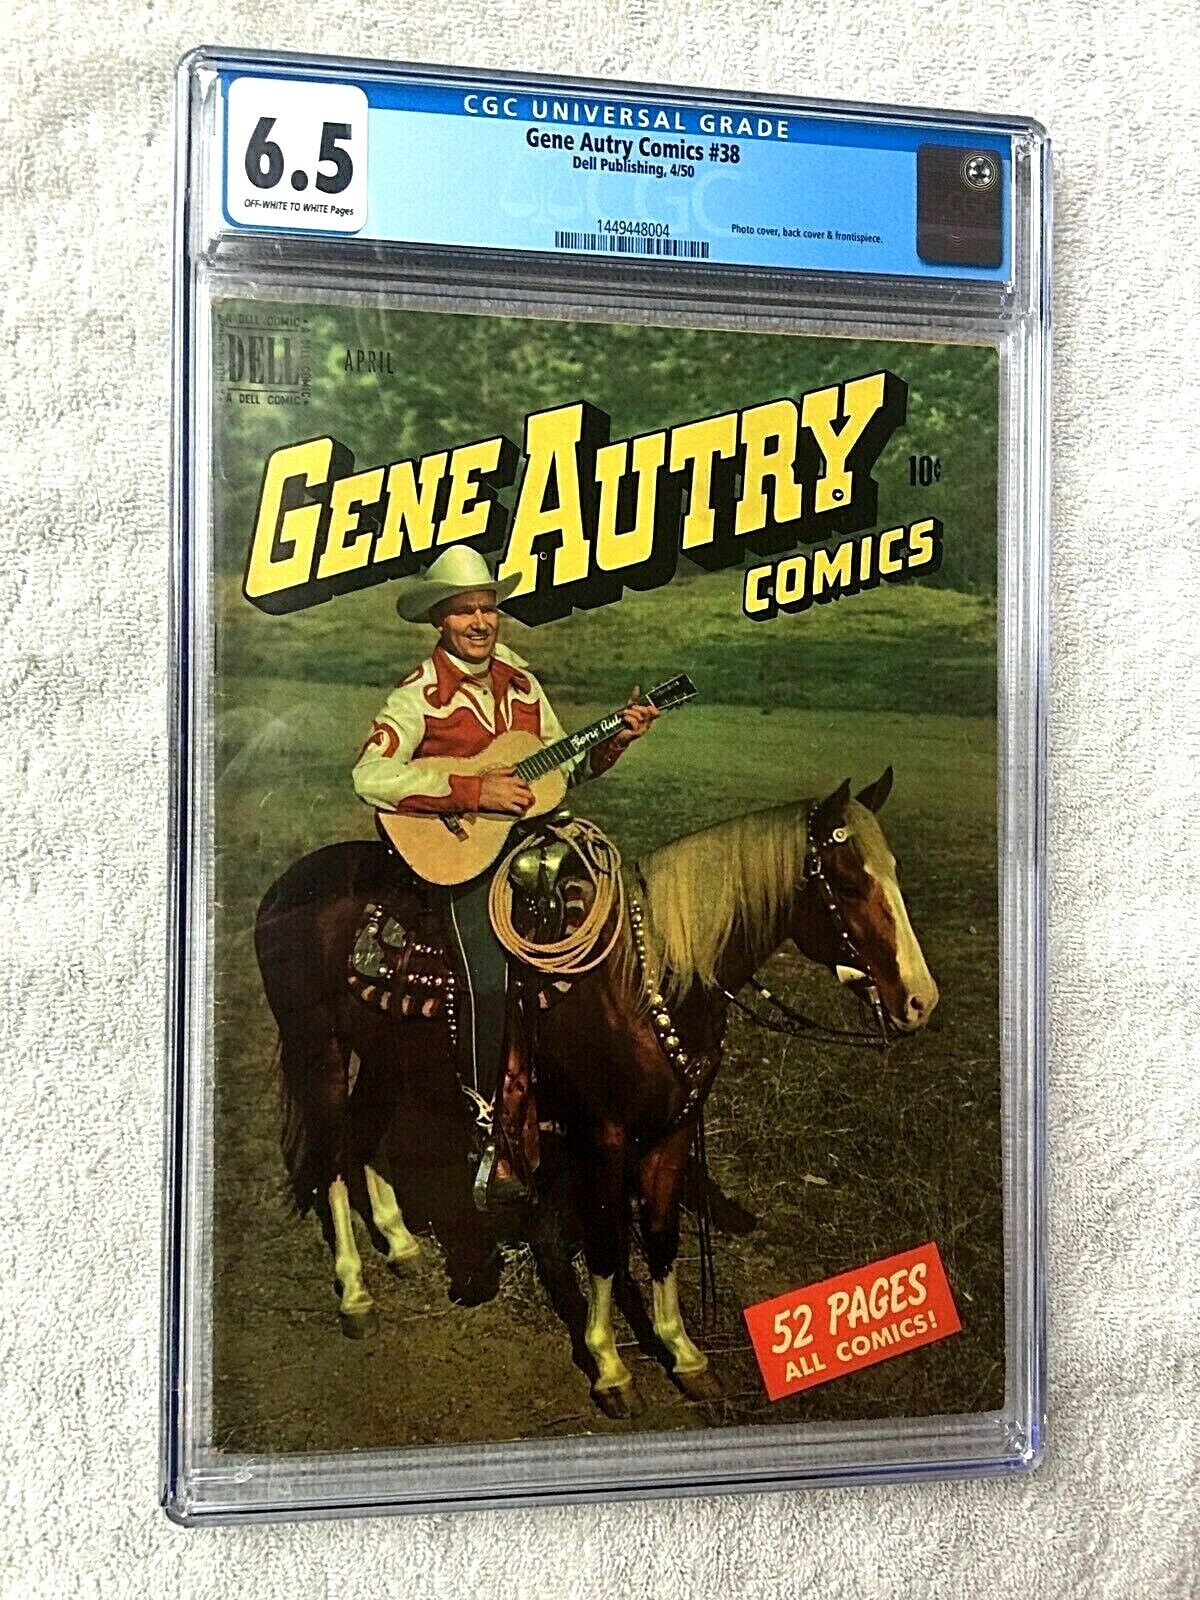 Gene Autry Comics #38 DELL Apr 1950 cgc 6.5 off-wh/Wht Pgs Photocover Front/Rear